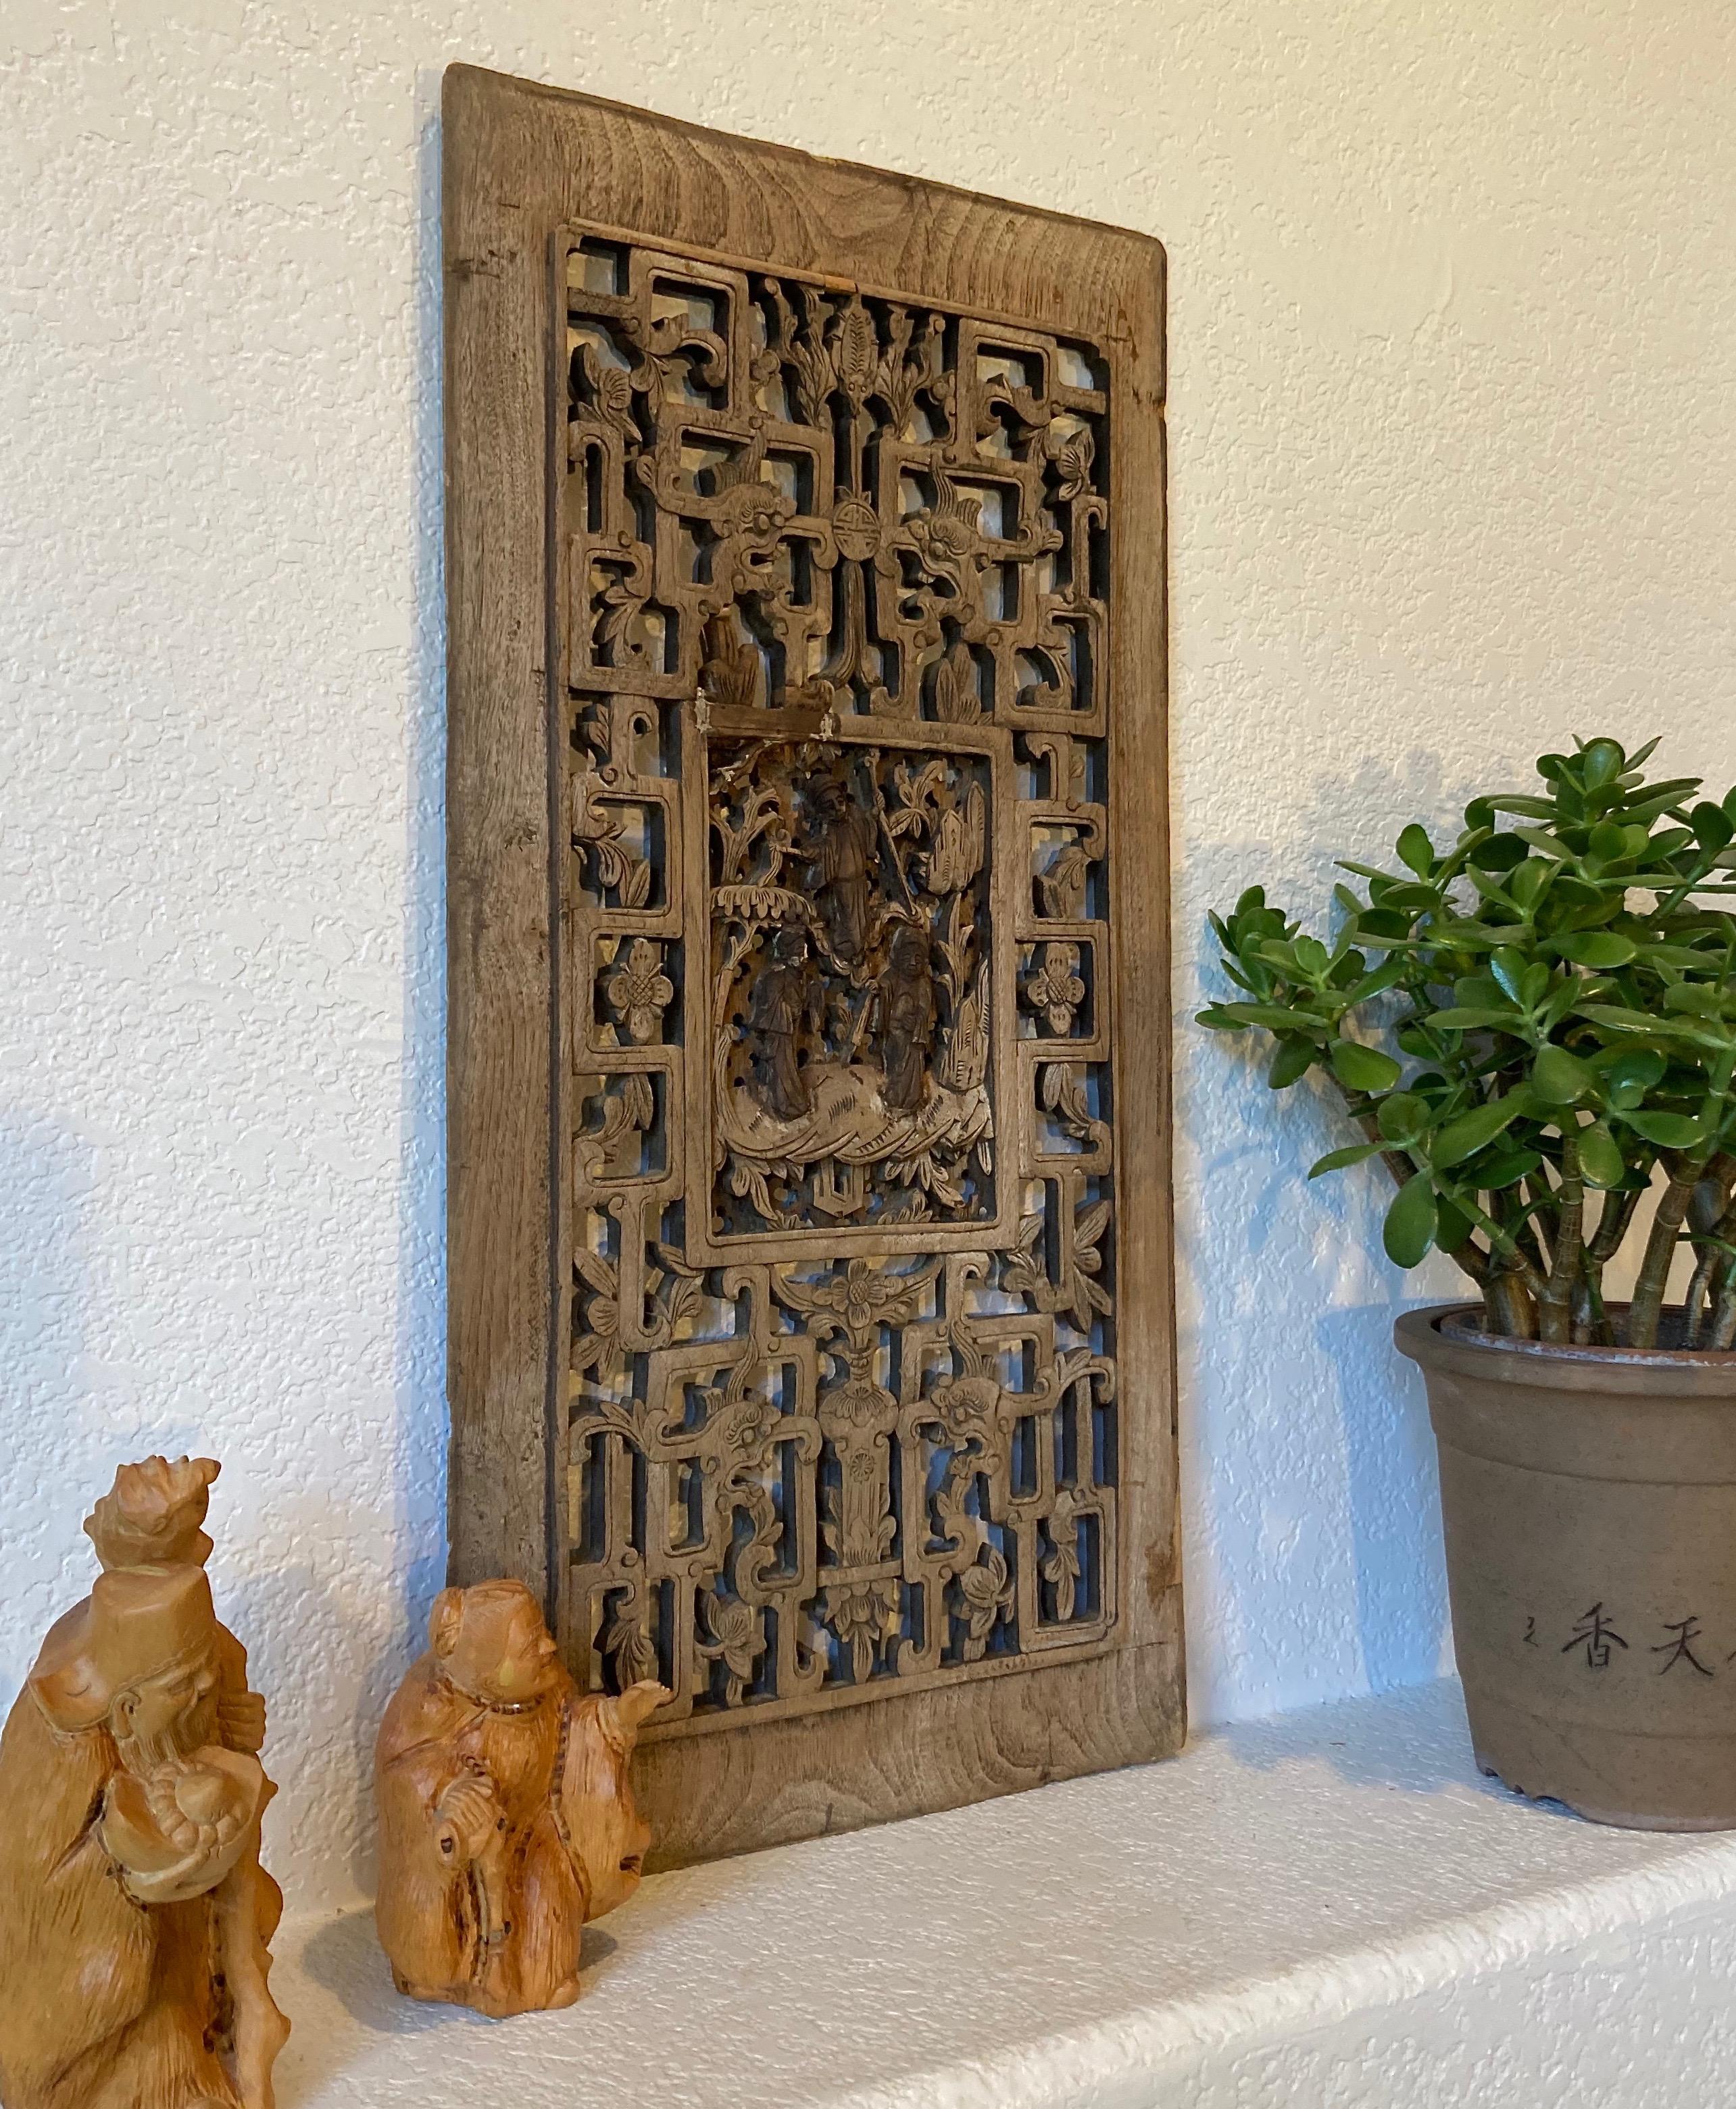 Unframed panel, hand carved from a solid piece of wood. Rectangular center carving with personage, dragon, bat and floral motifs.